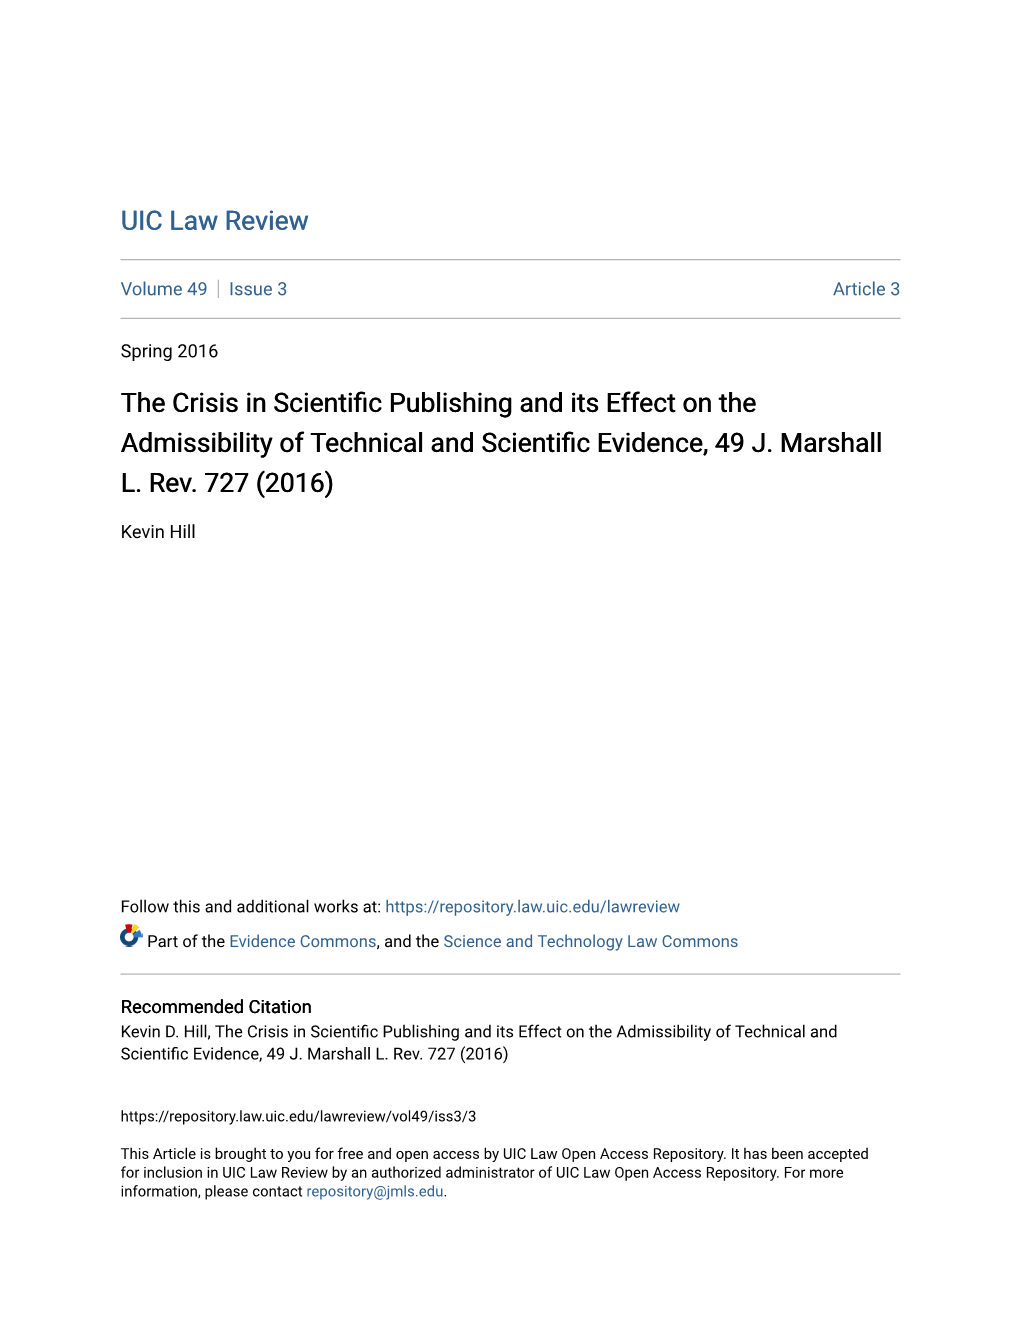 The Crisis in Scientific Publishing and Its Effect on the Admissibility of Technical and Scientific Evidence